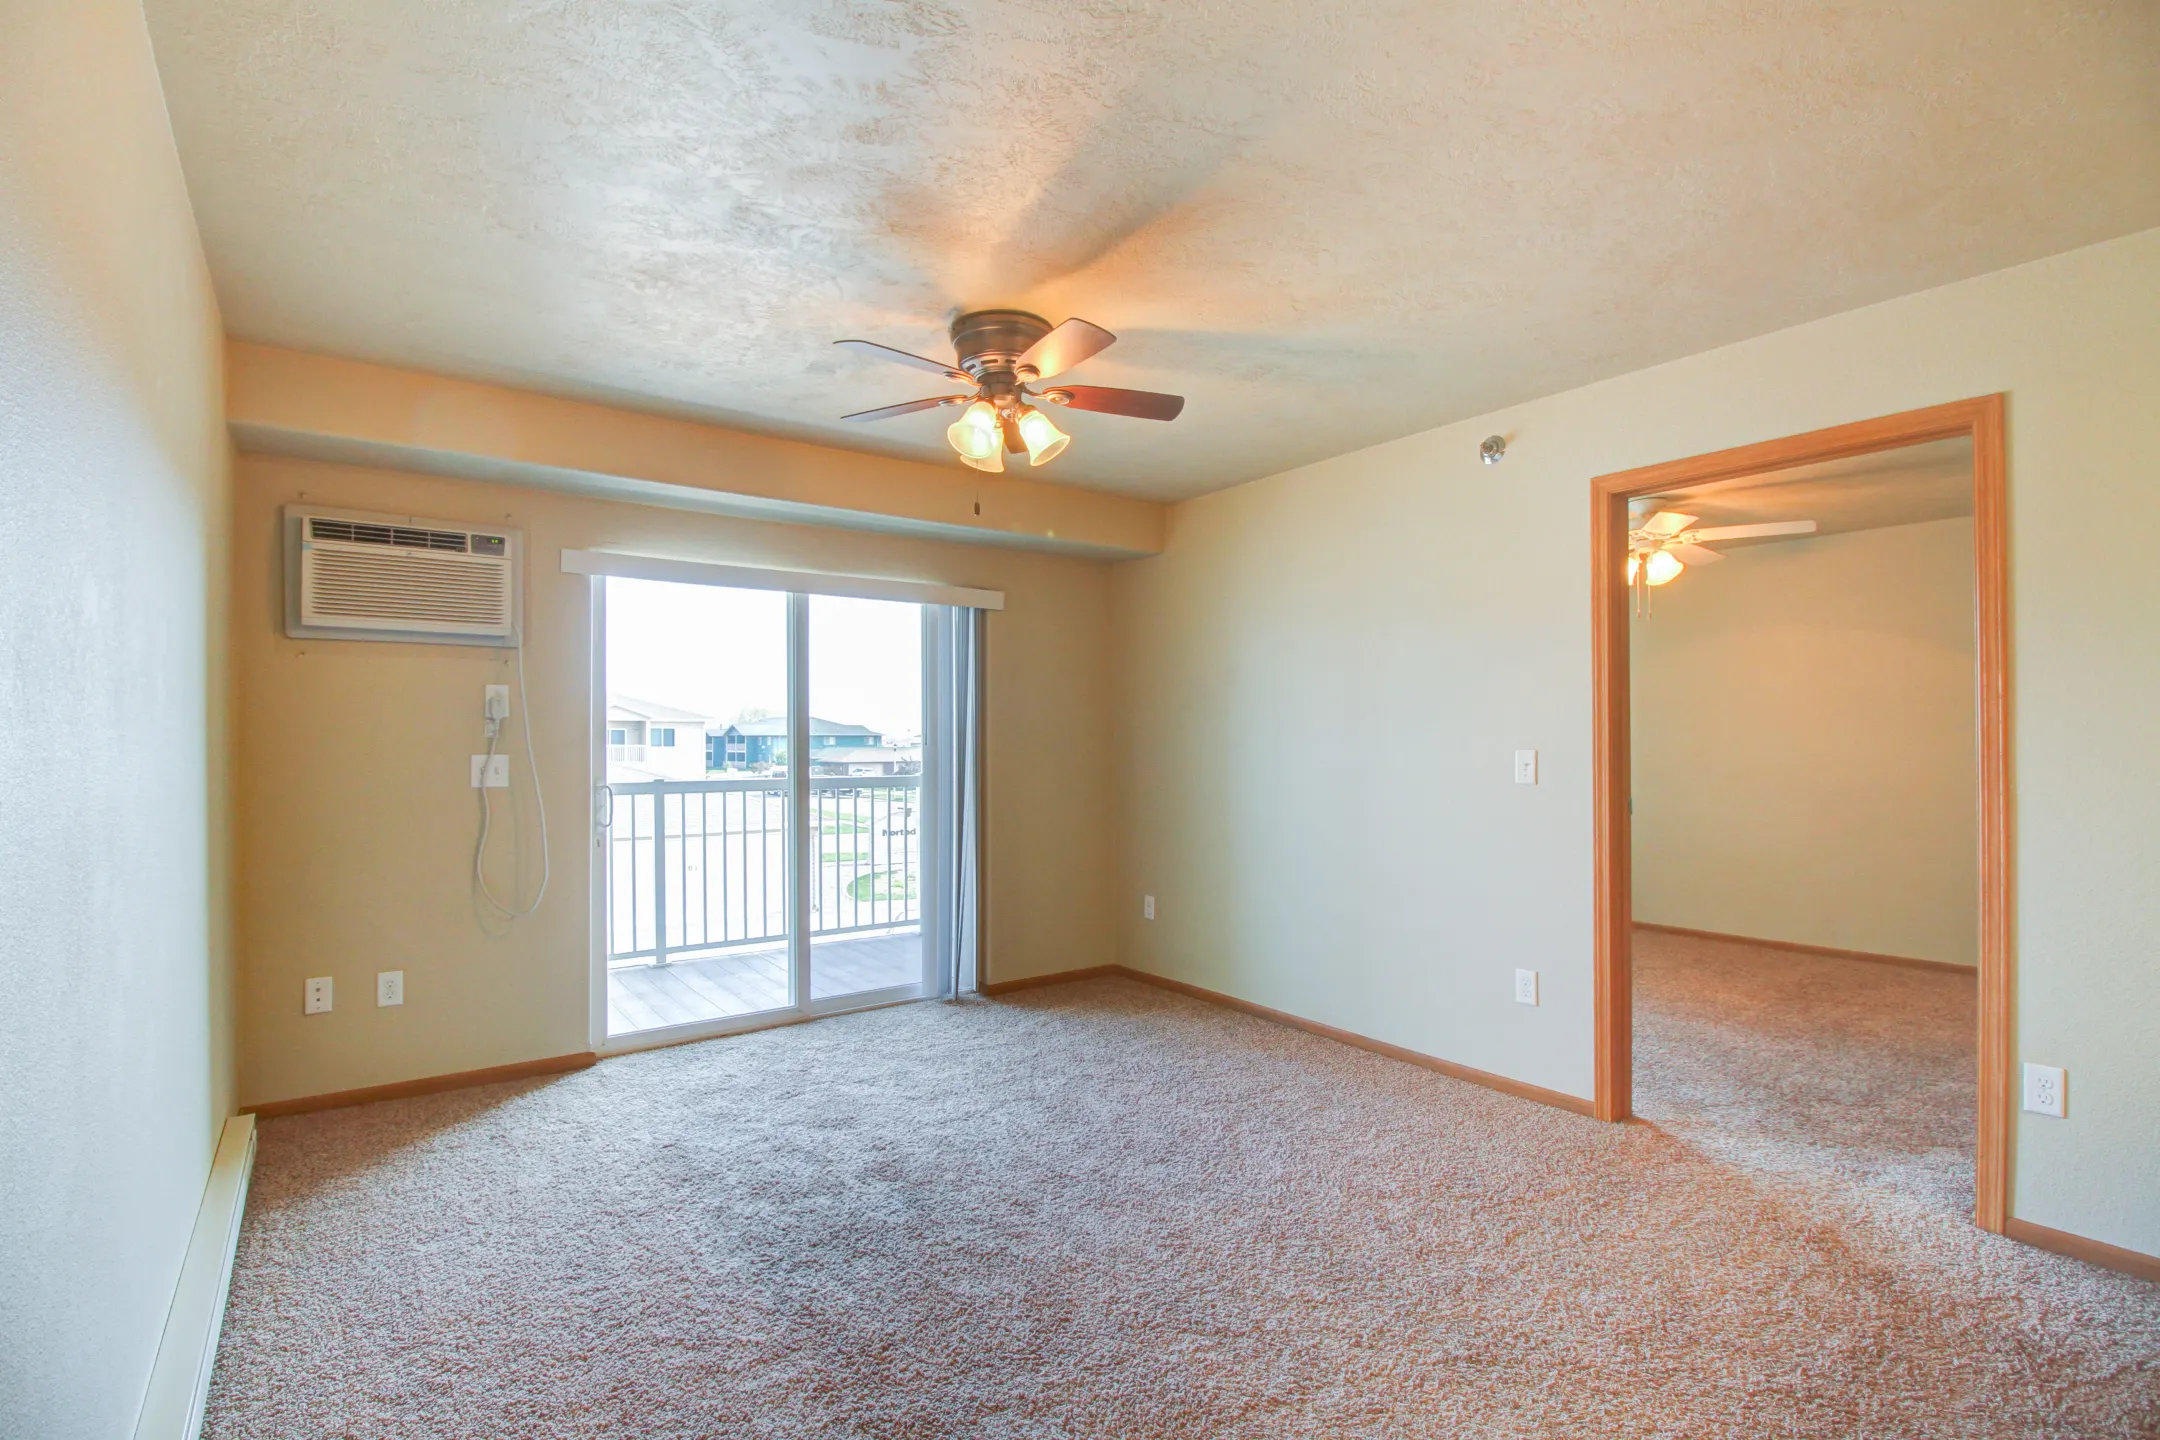 Living Room - Northdale Apartments - Minot, ND